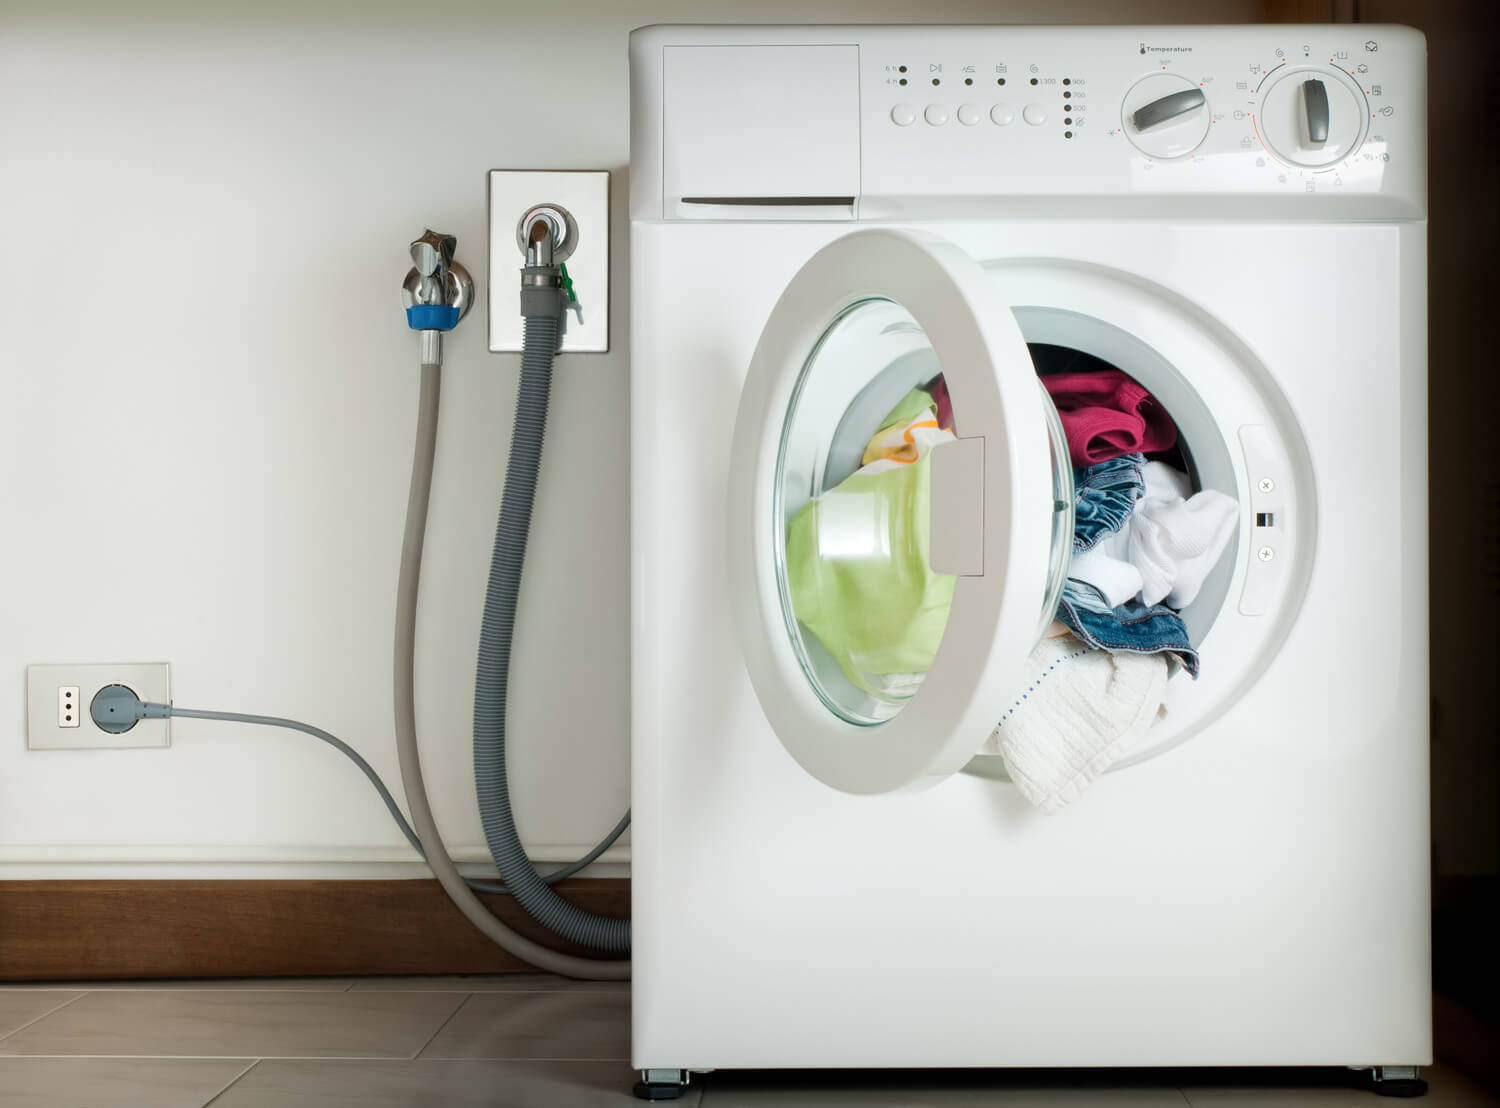 Check the draining system of your washing machine